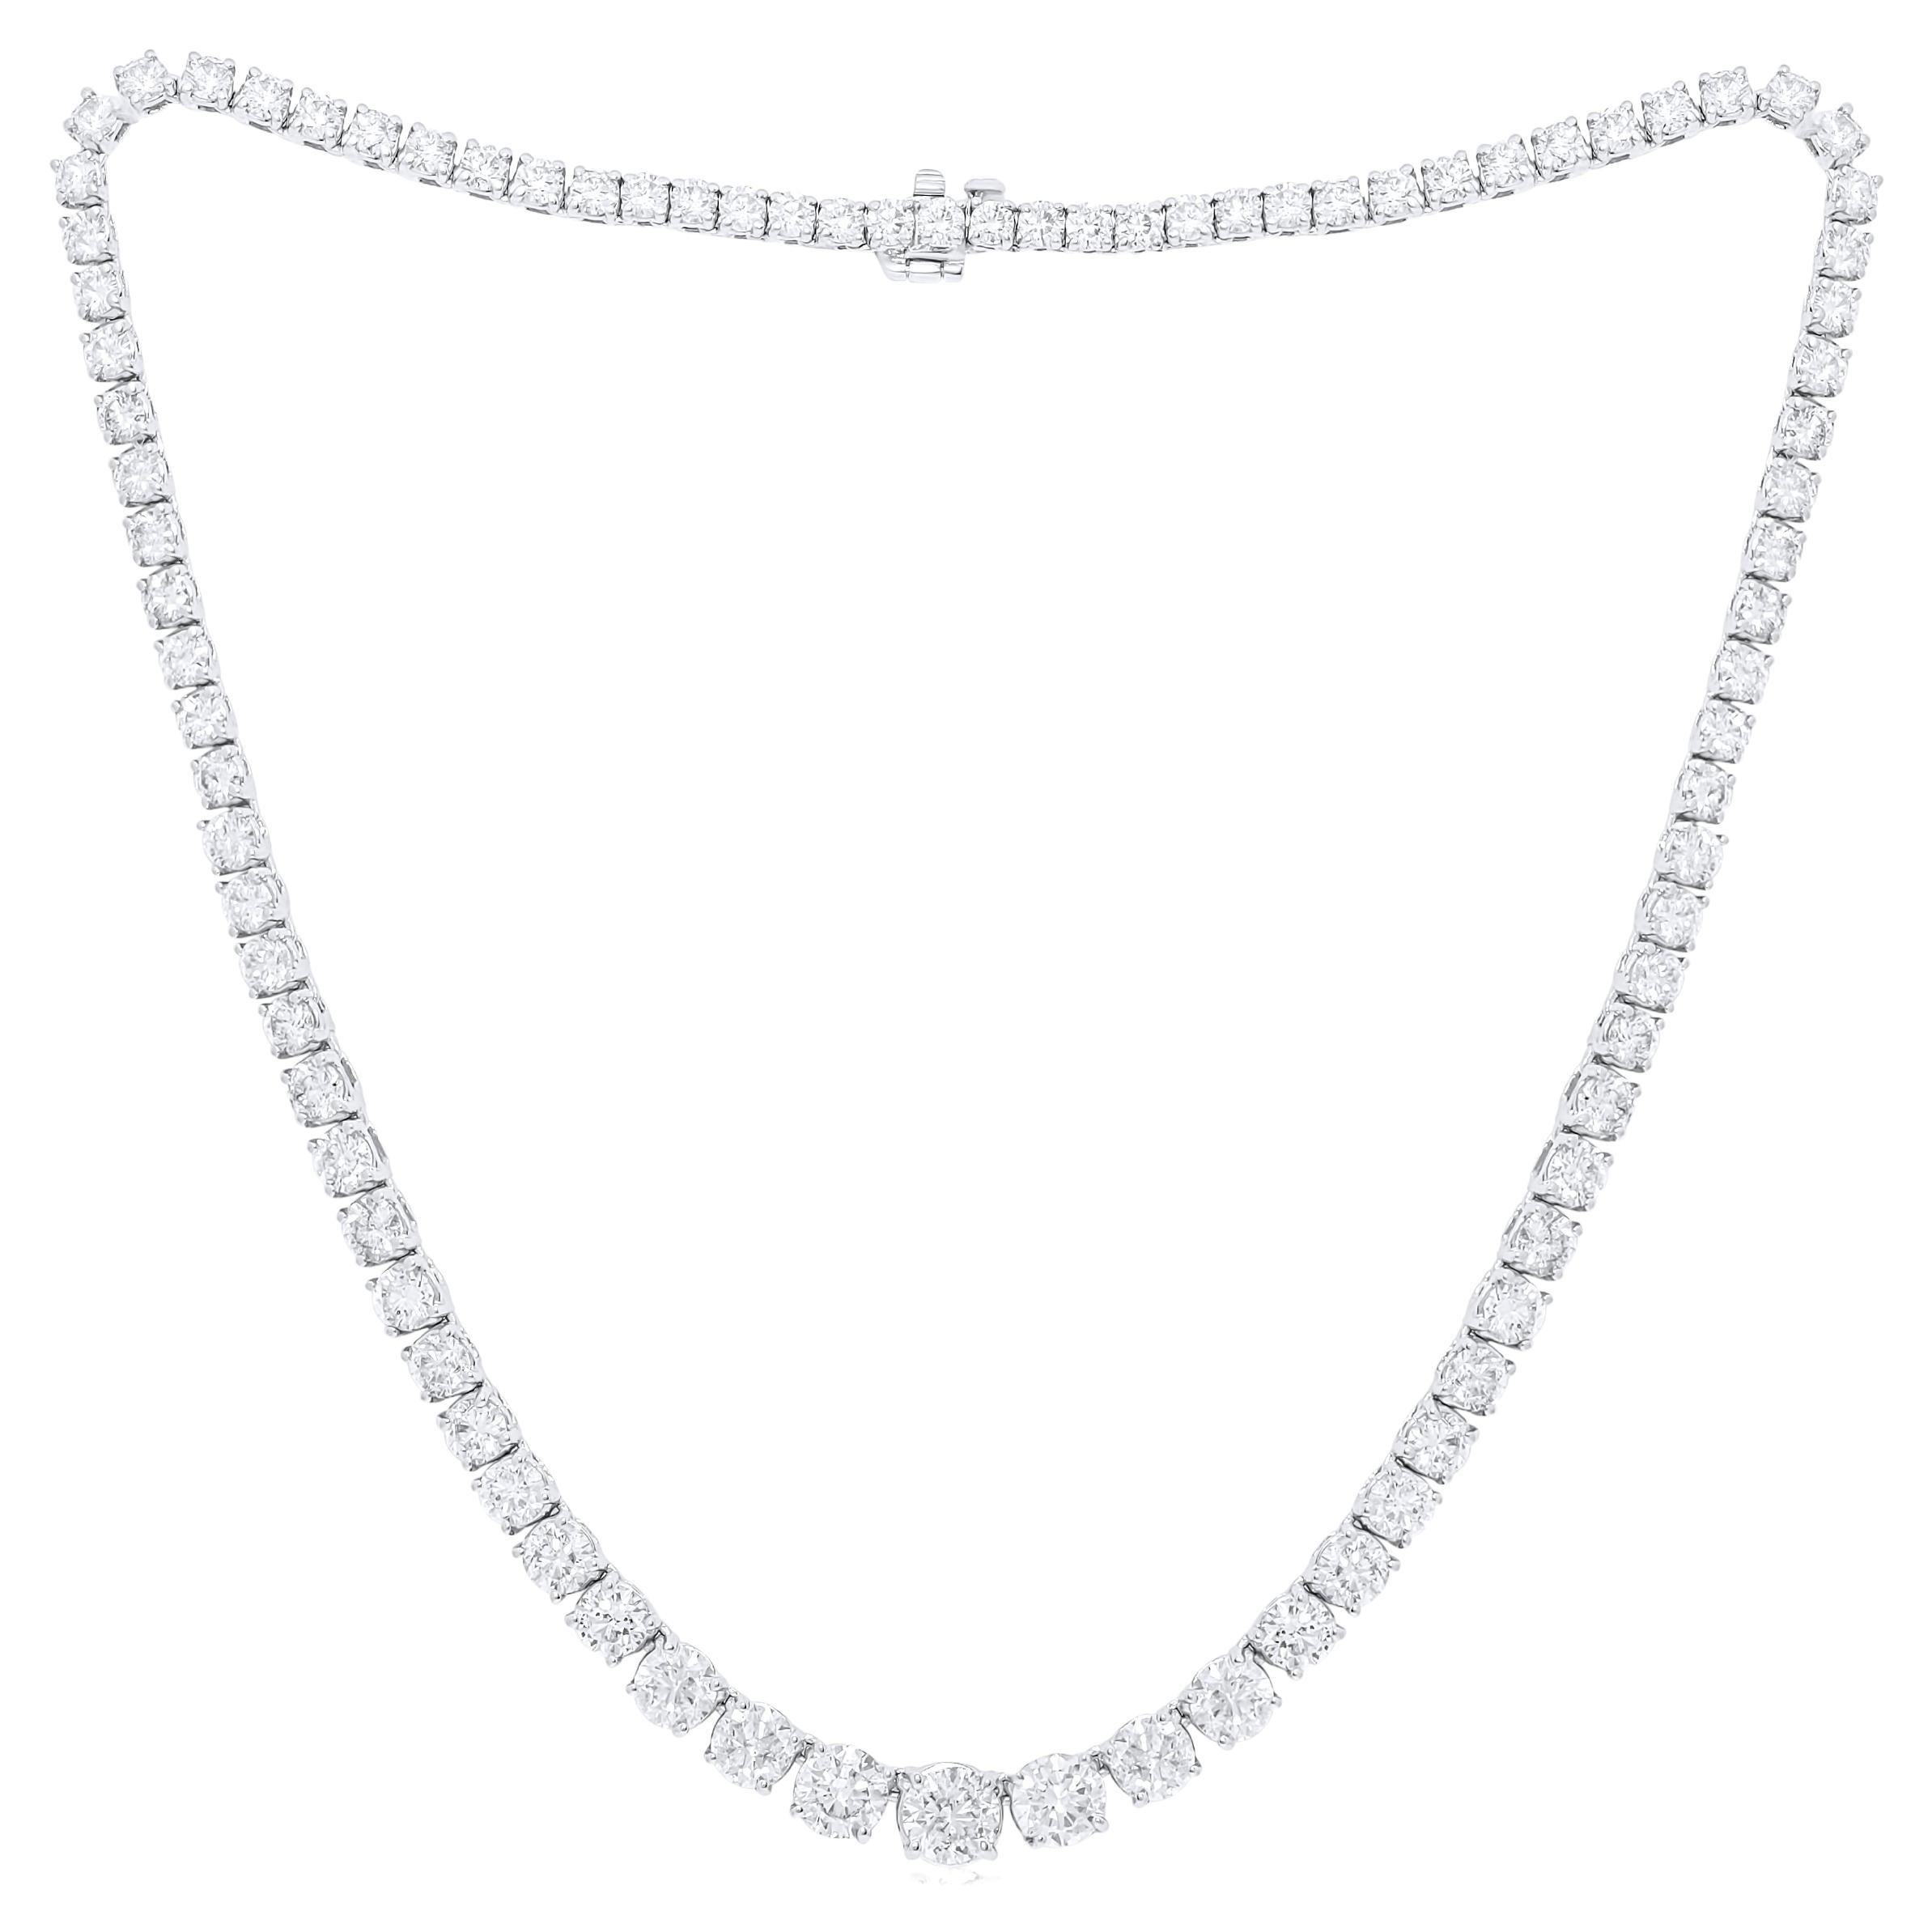 Diana M. 14kt White Gold Graduated Reviera Tennis Necklace  20.00 cts 4 prong